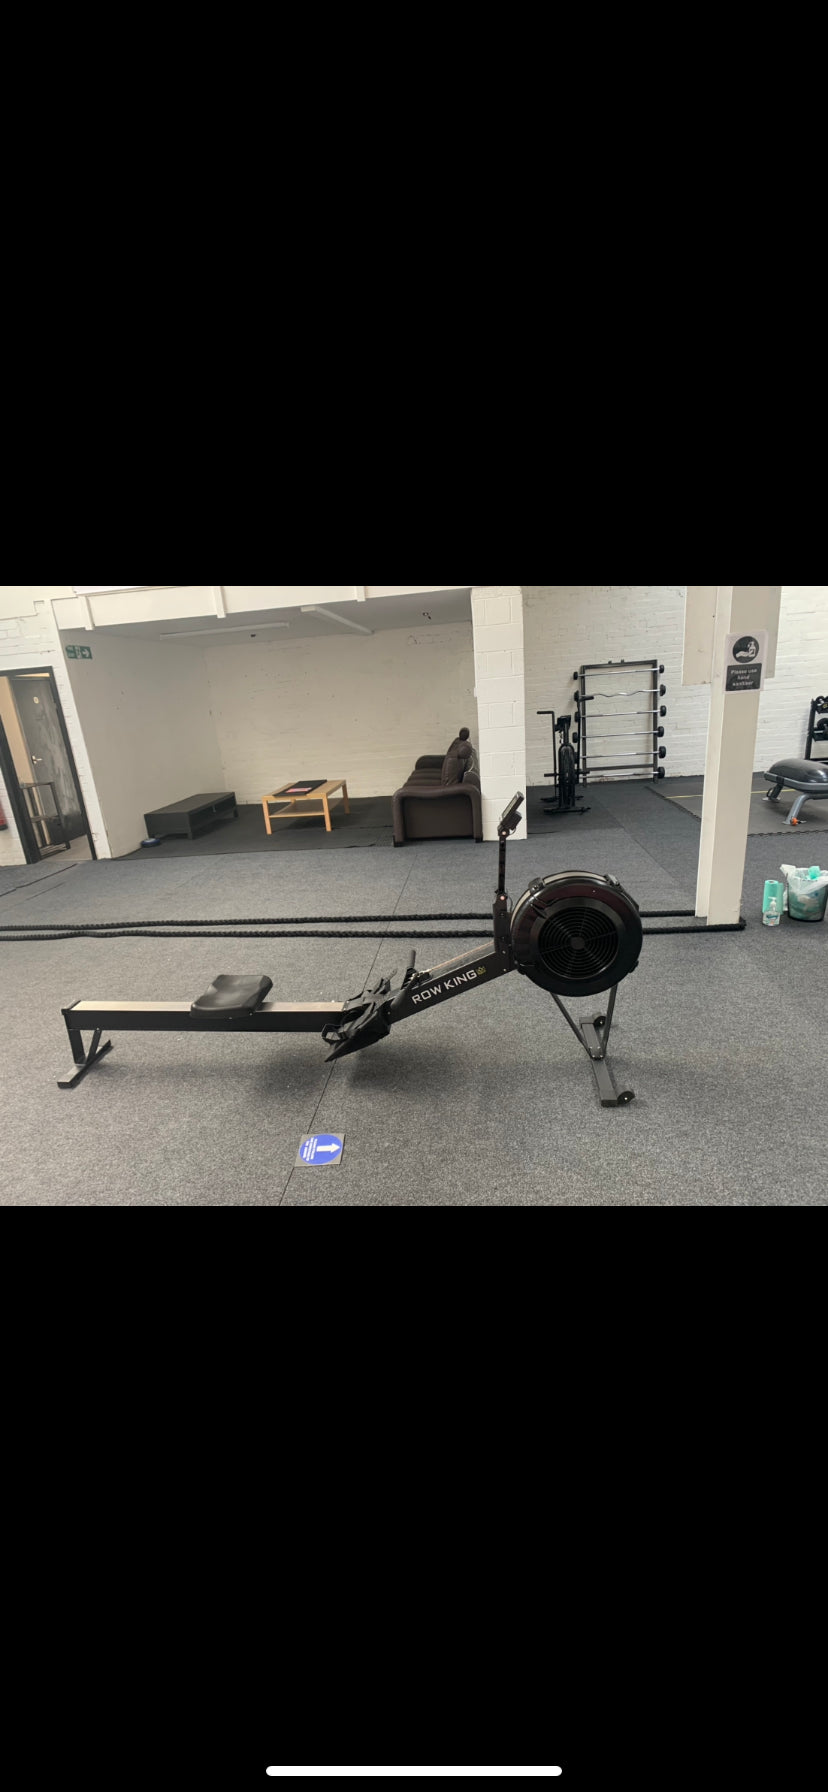 Row King - Air Rower delivered